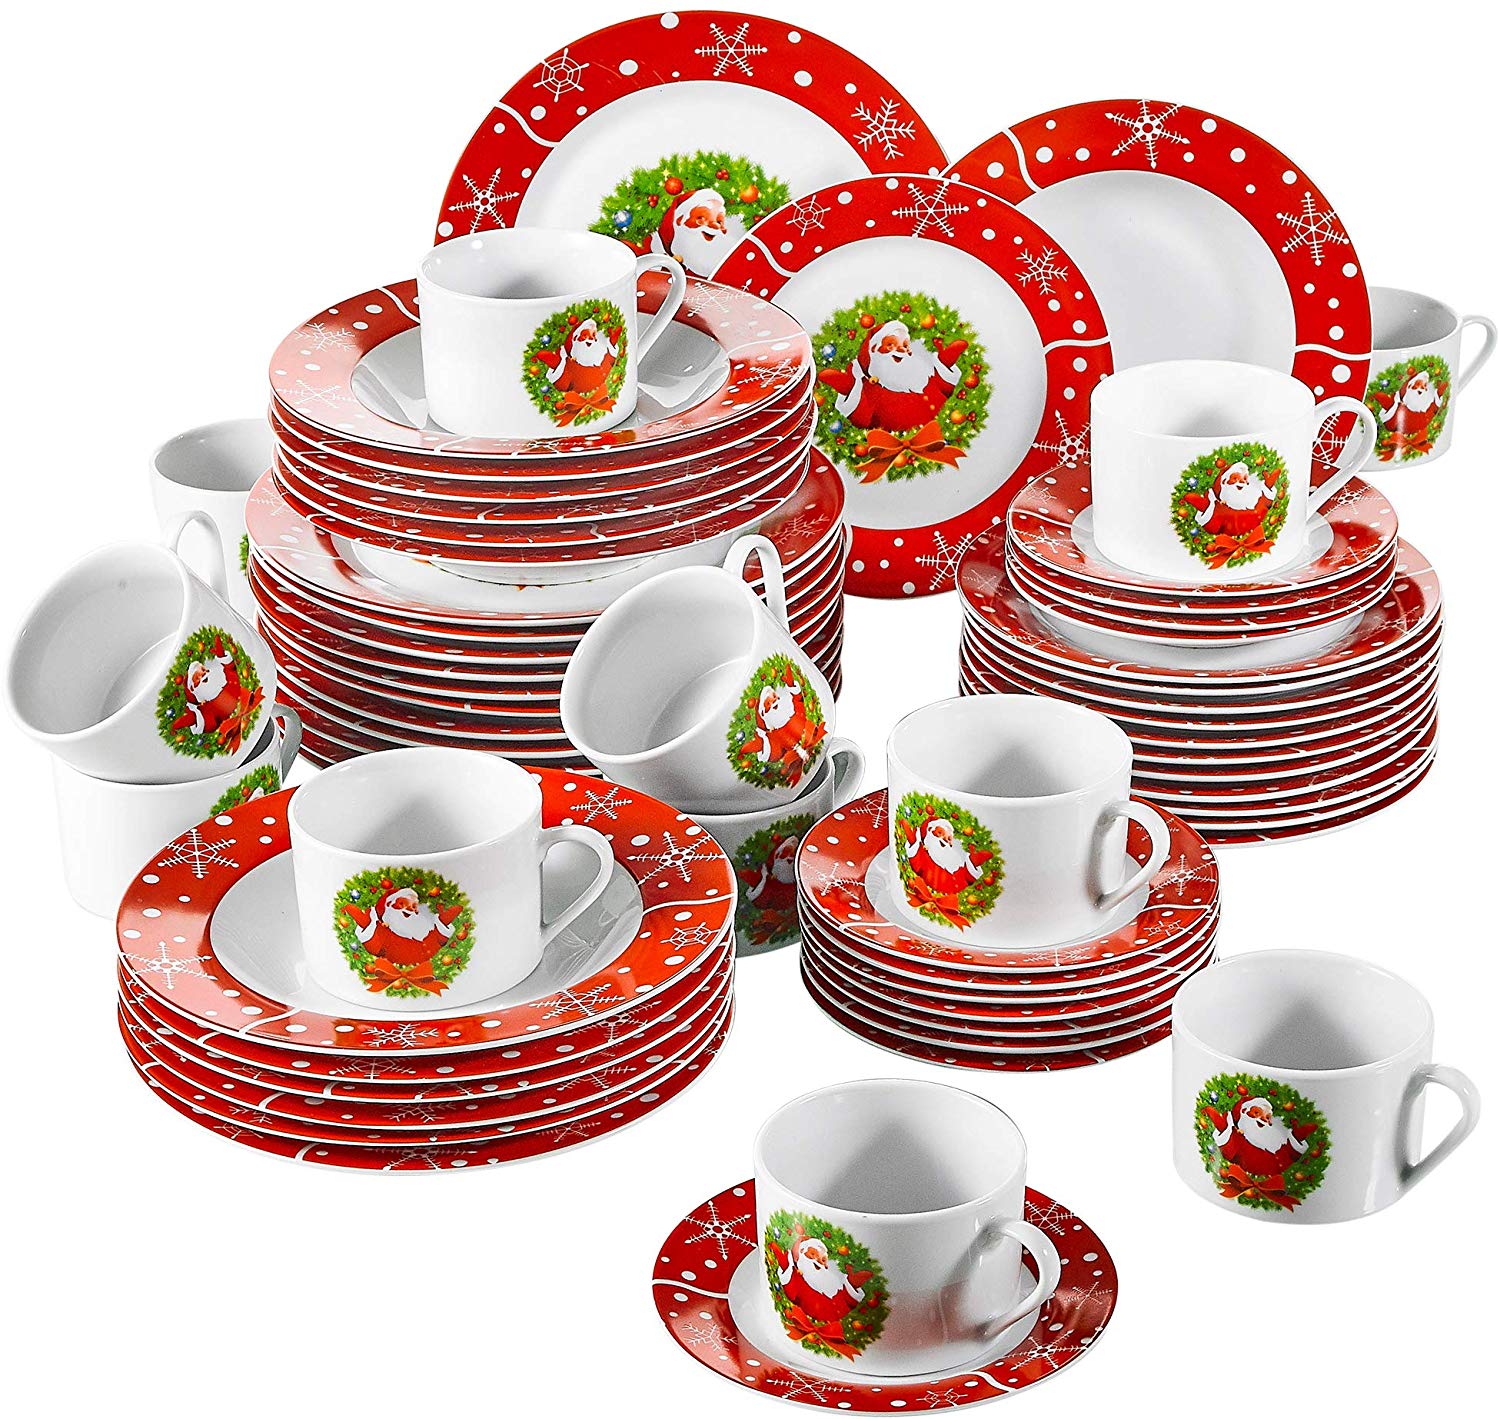 Veweet Series, 60 Piece Table Service For 12 People Porcelain Santa Claus G